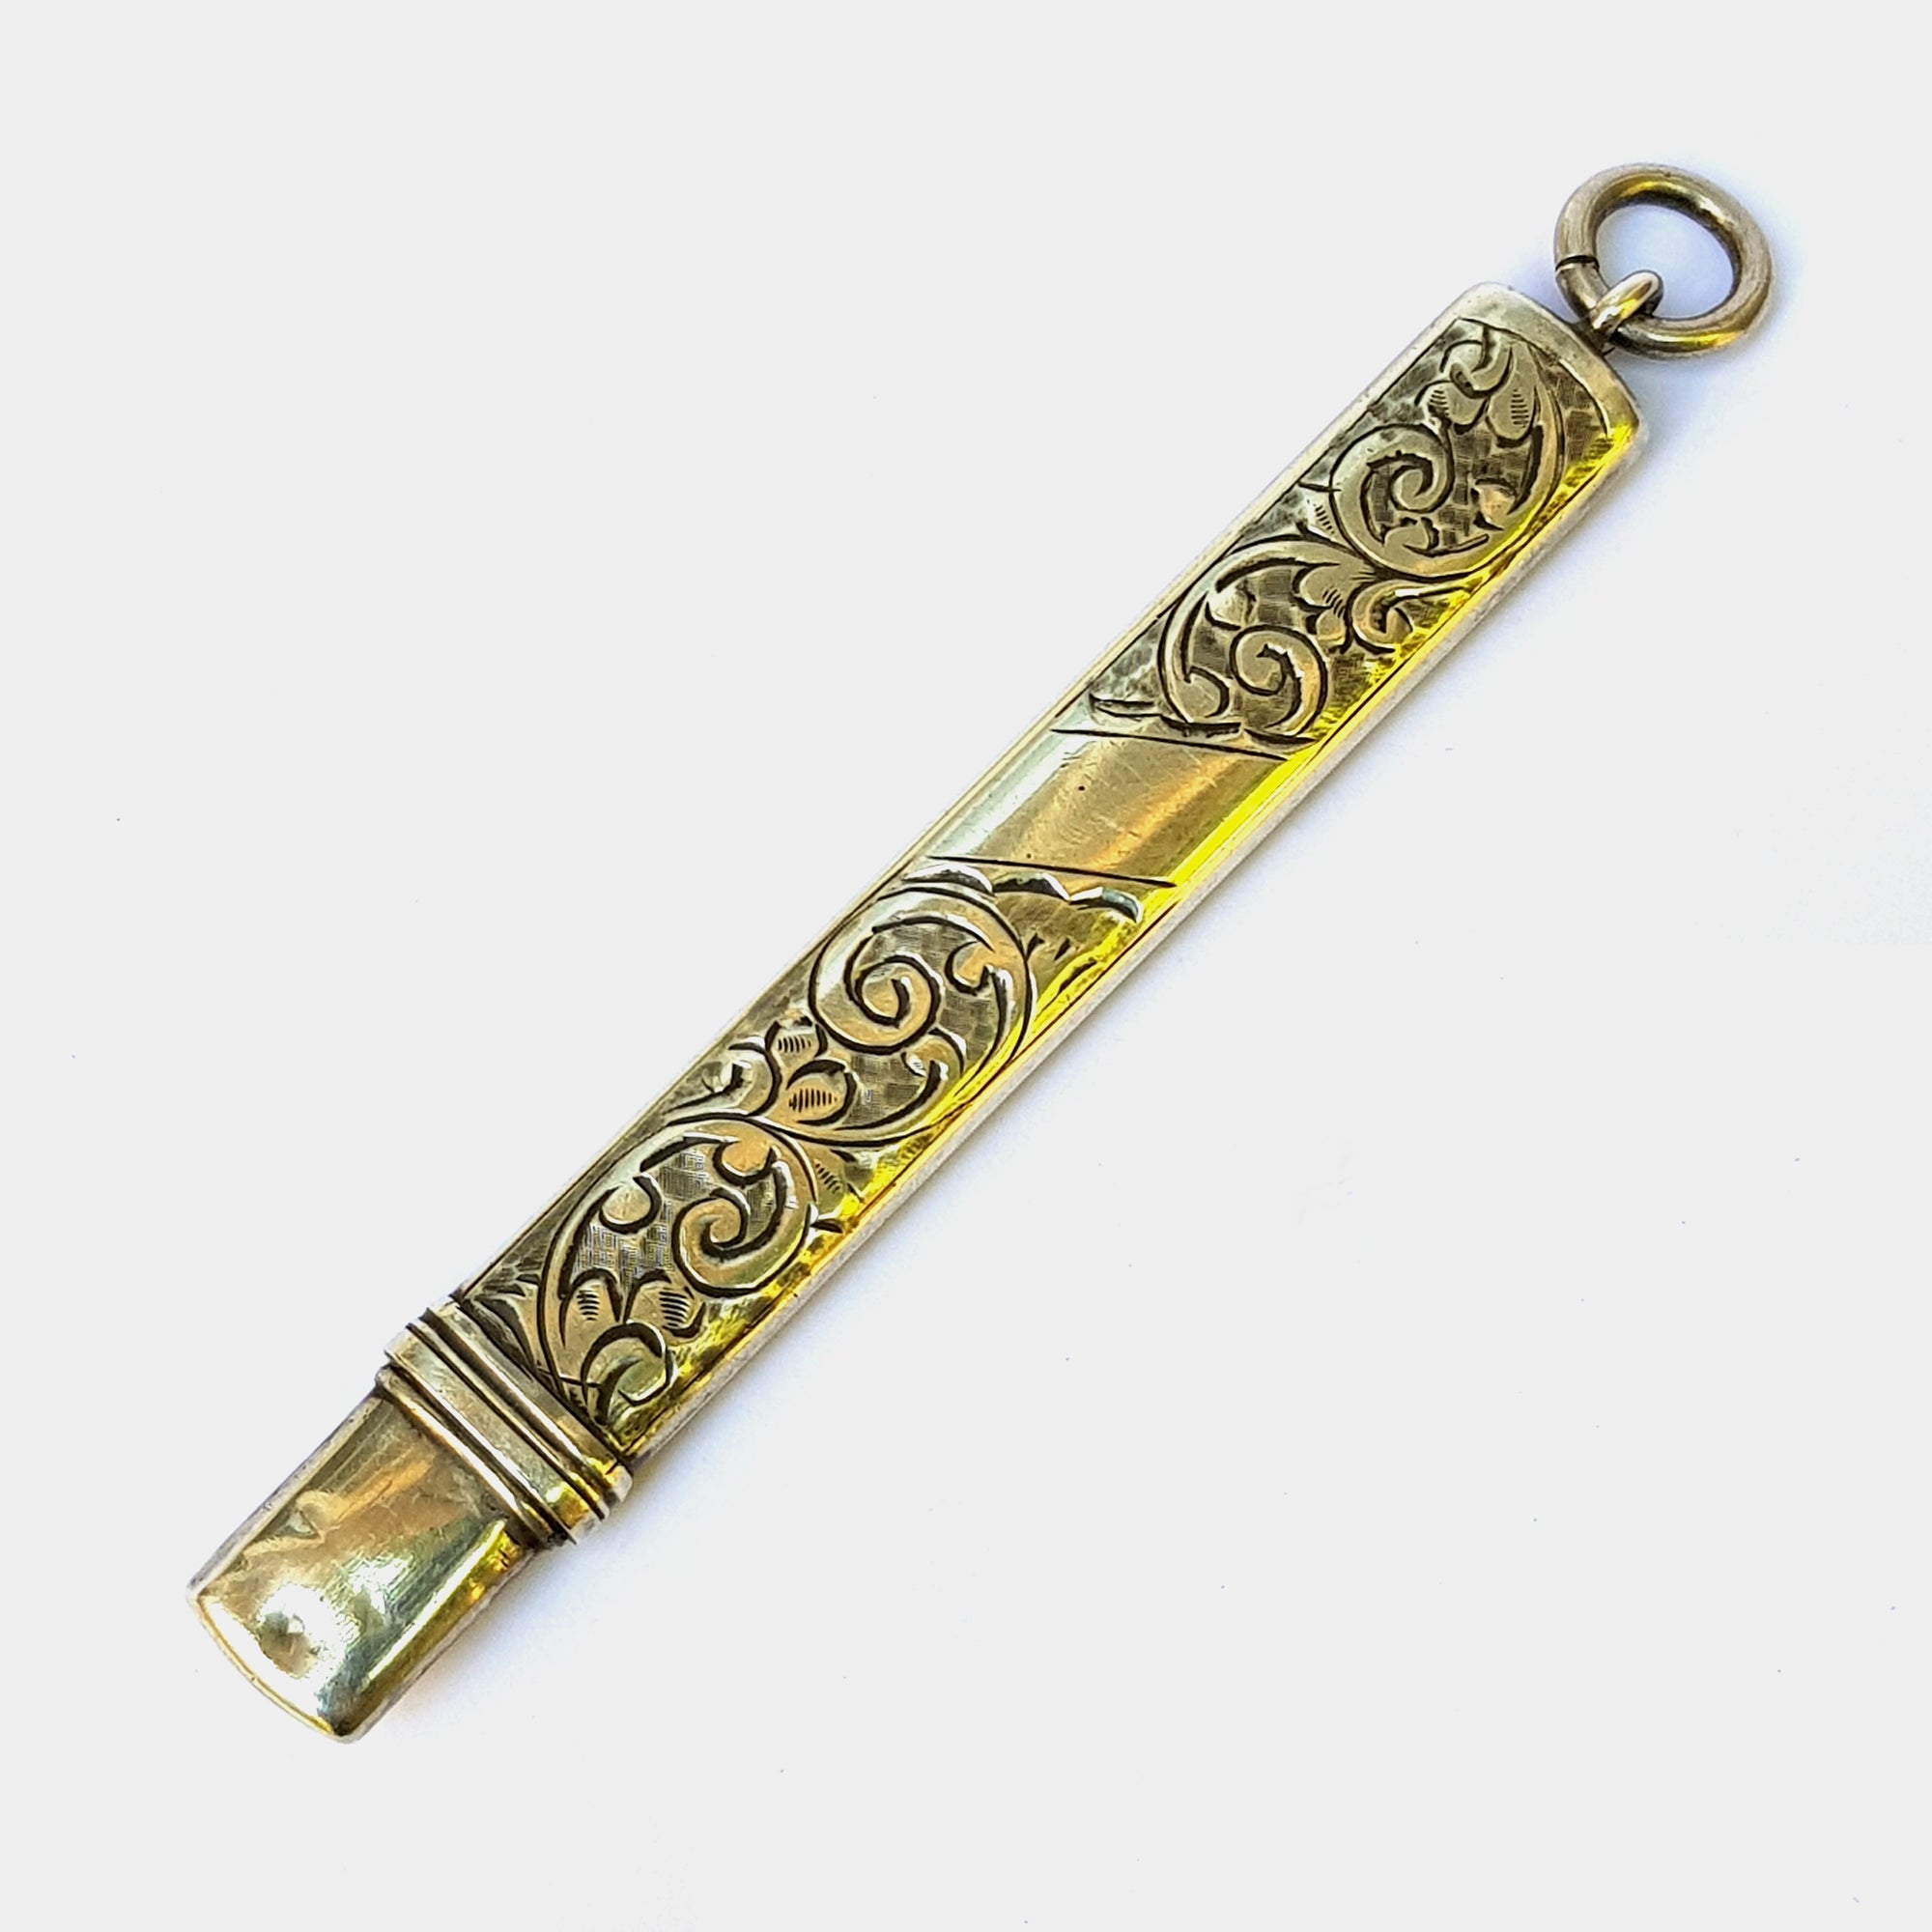 Sterling Silver Floral Chased Ornate Chatelaine Fob Pencil Antique Birmingham Circa 1911